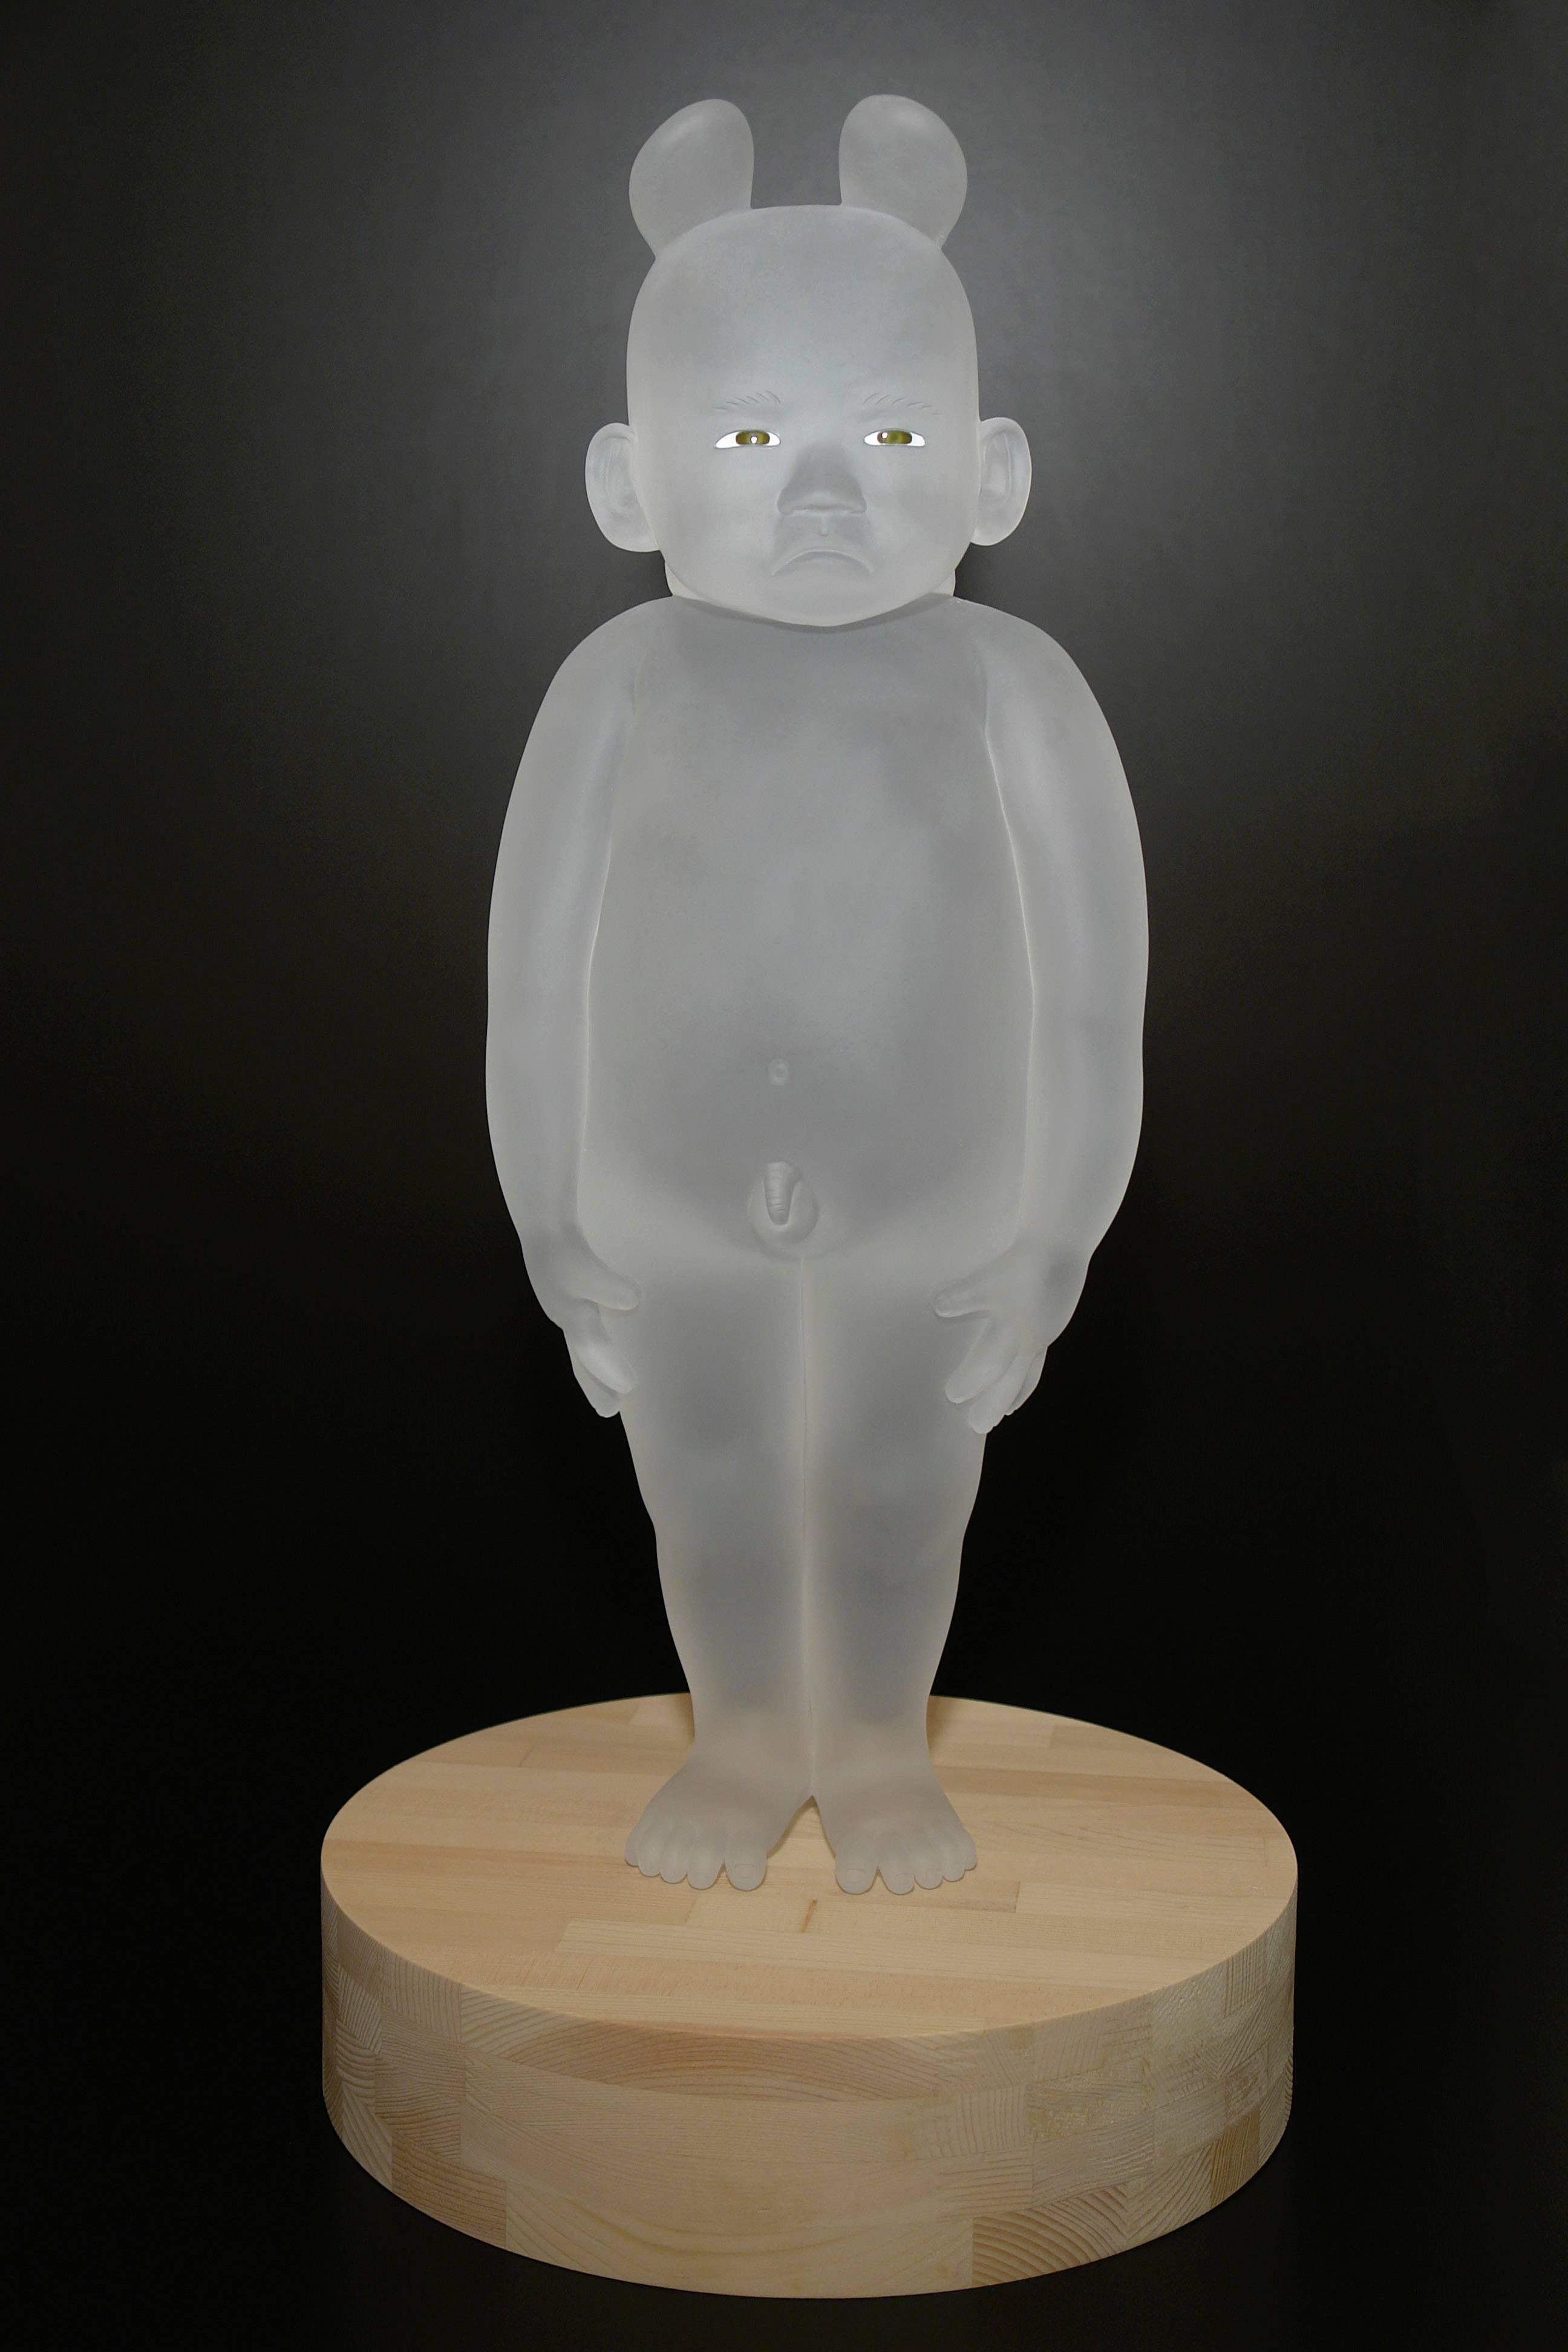 Koichi uses the lost-wax kiln casting glass technique. First, he makes the original form of the babies in wax, pours it in refractory plaster to create a mold and fills the mold with glass in the electric kiln. Koichi melts it at a high temperature